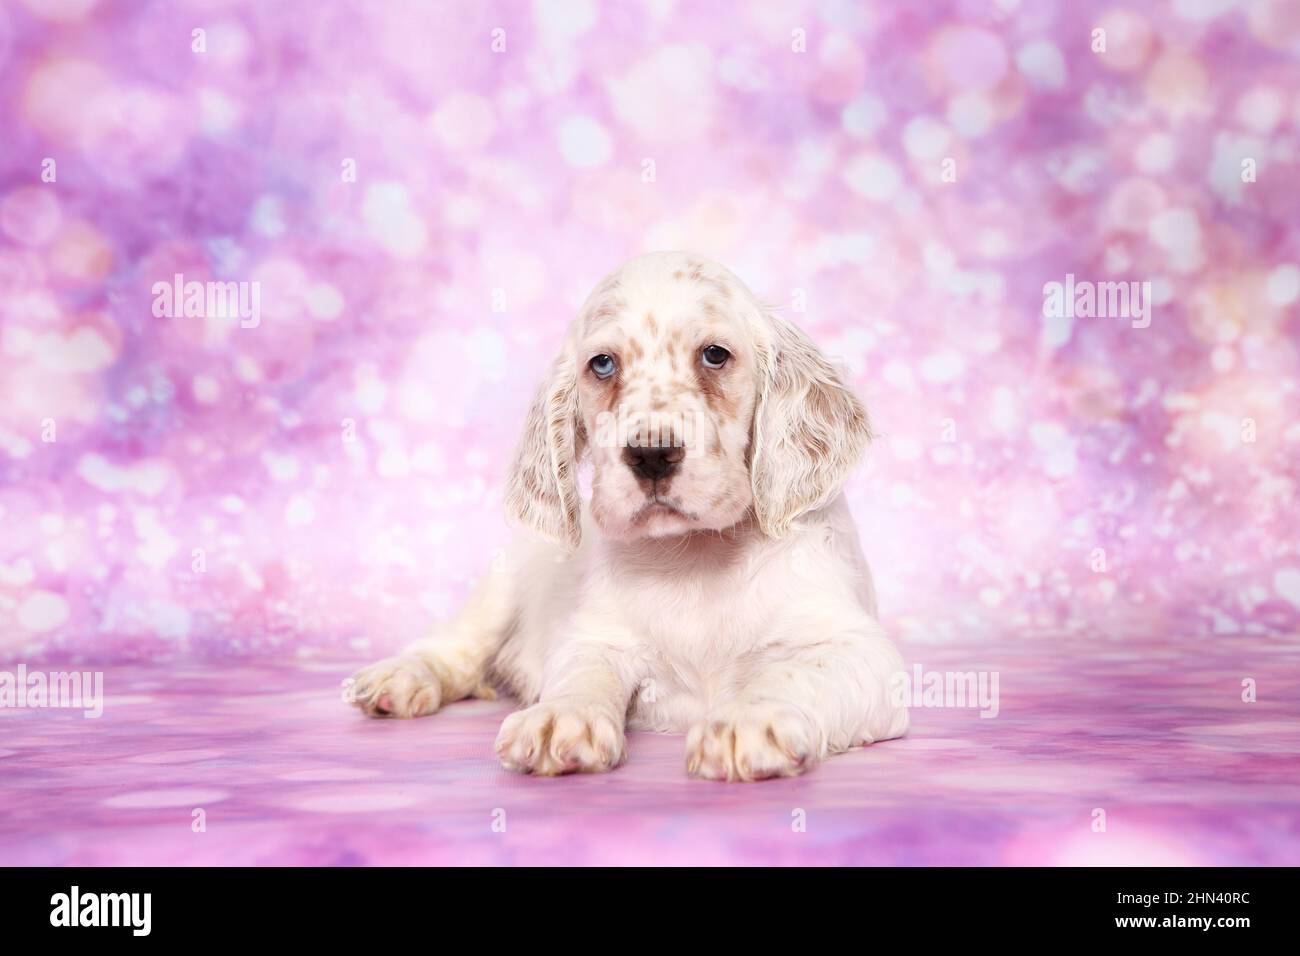 English Setter. Puppy lying, seen against a purple background. Germany Stock Photo